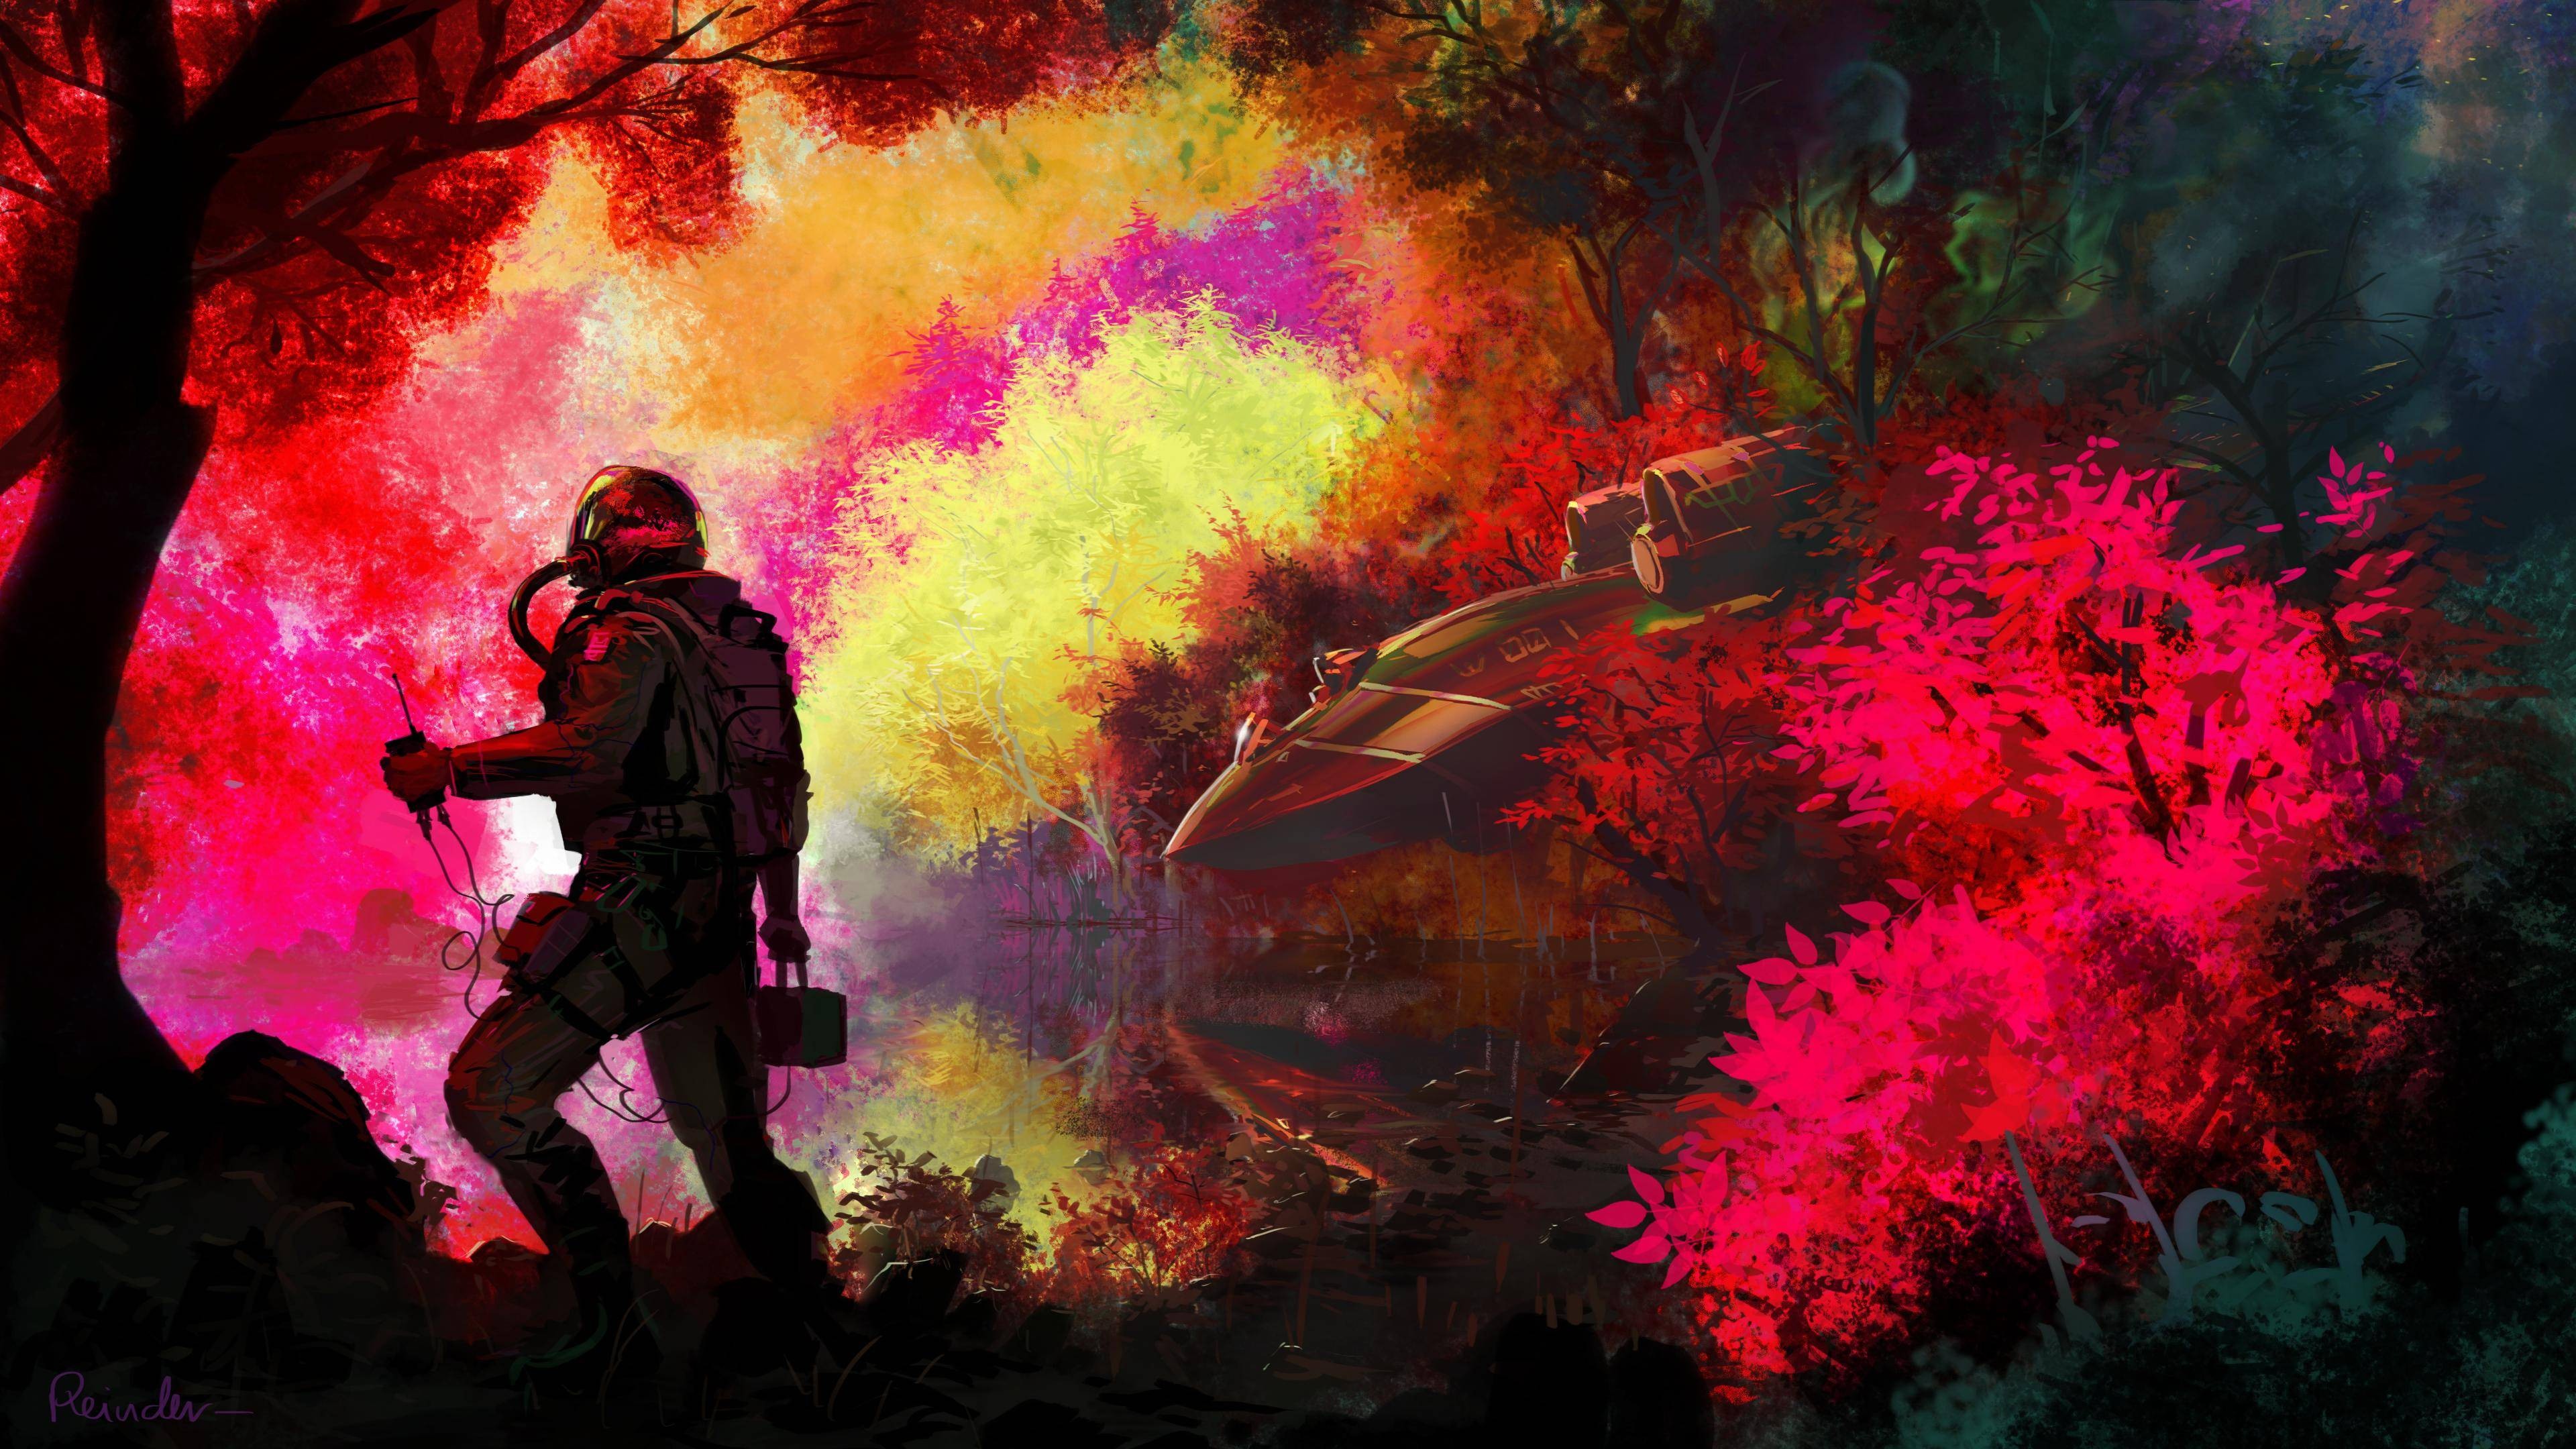 Astronaut Spaceship Lake Colorful Reflection Military Aircraft Trees Artwork Fantasy Art Spacesuit S 3840x2160